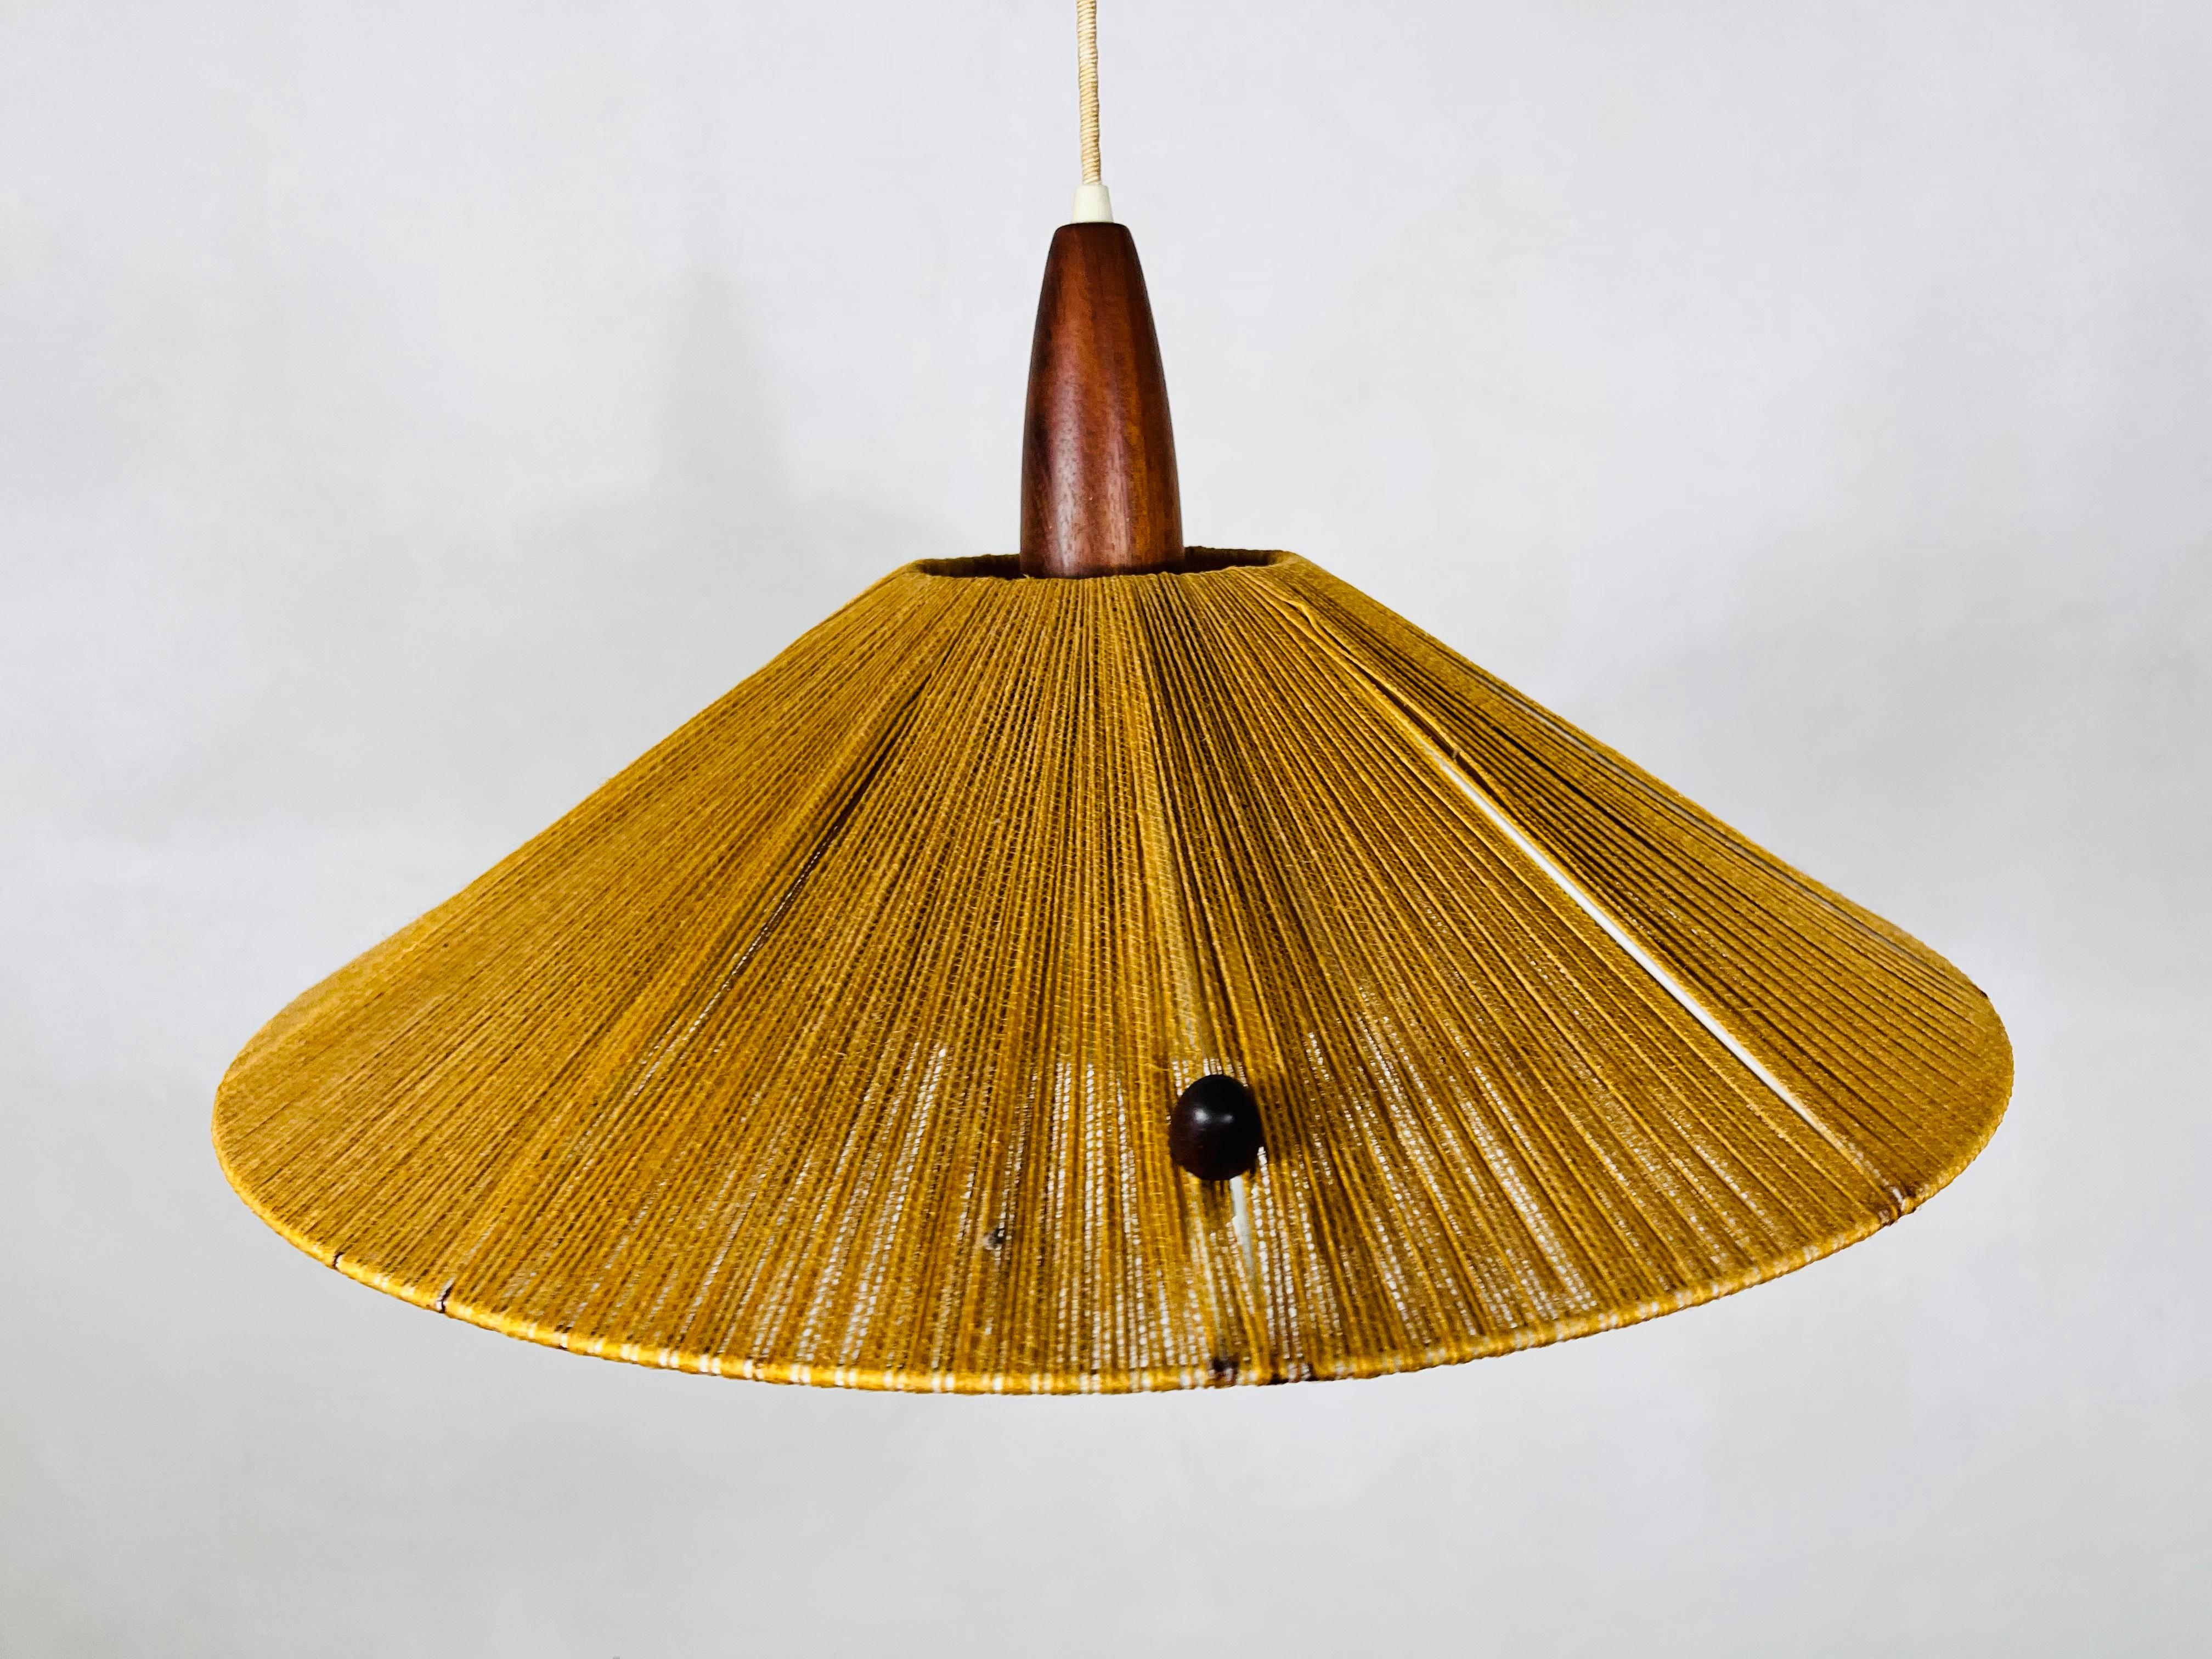 Midcentury Teak and Cord Shade Hanging Lamp by Temde, circa 1960 For Sale 2